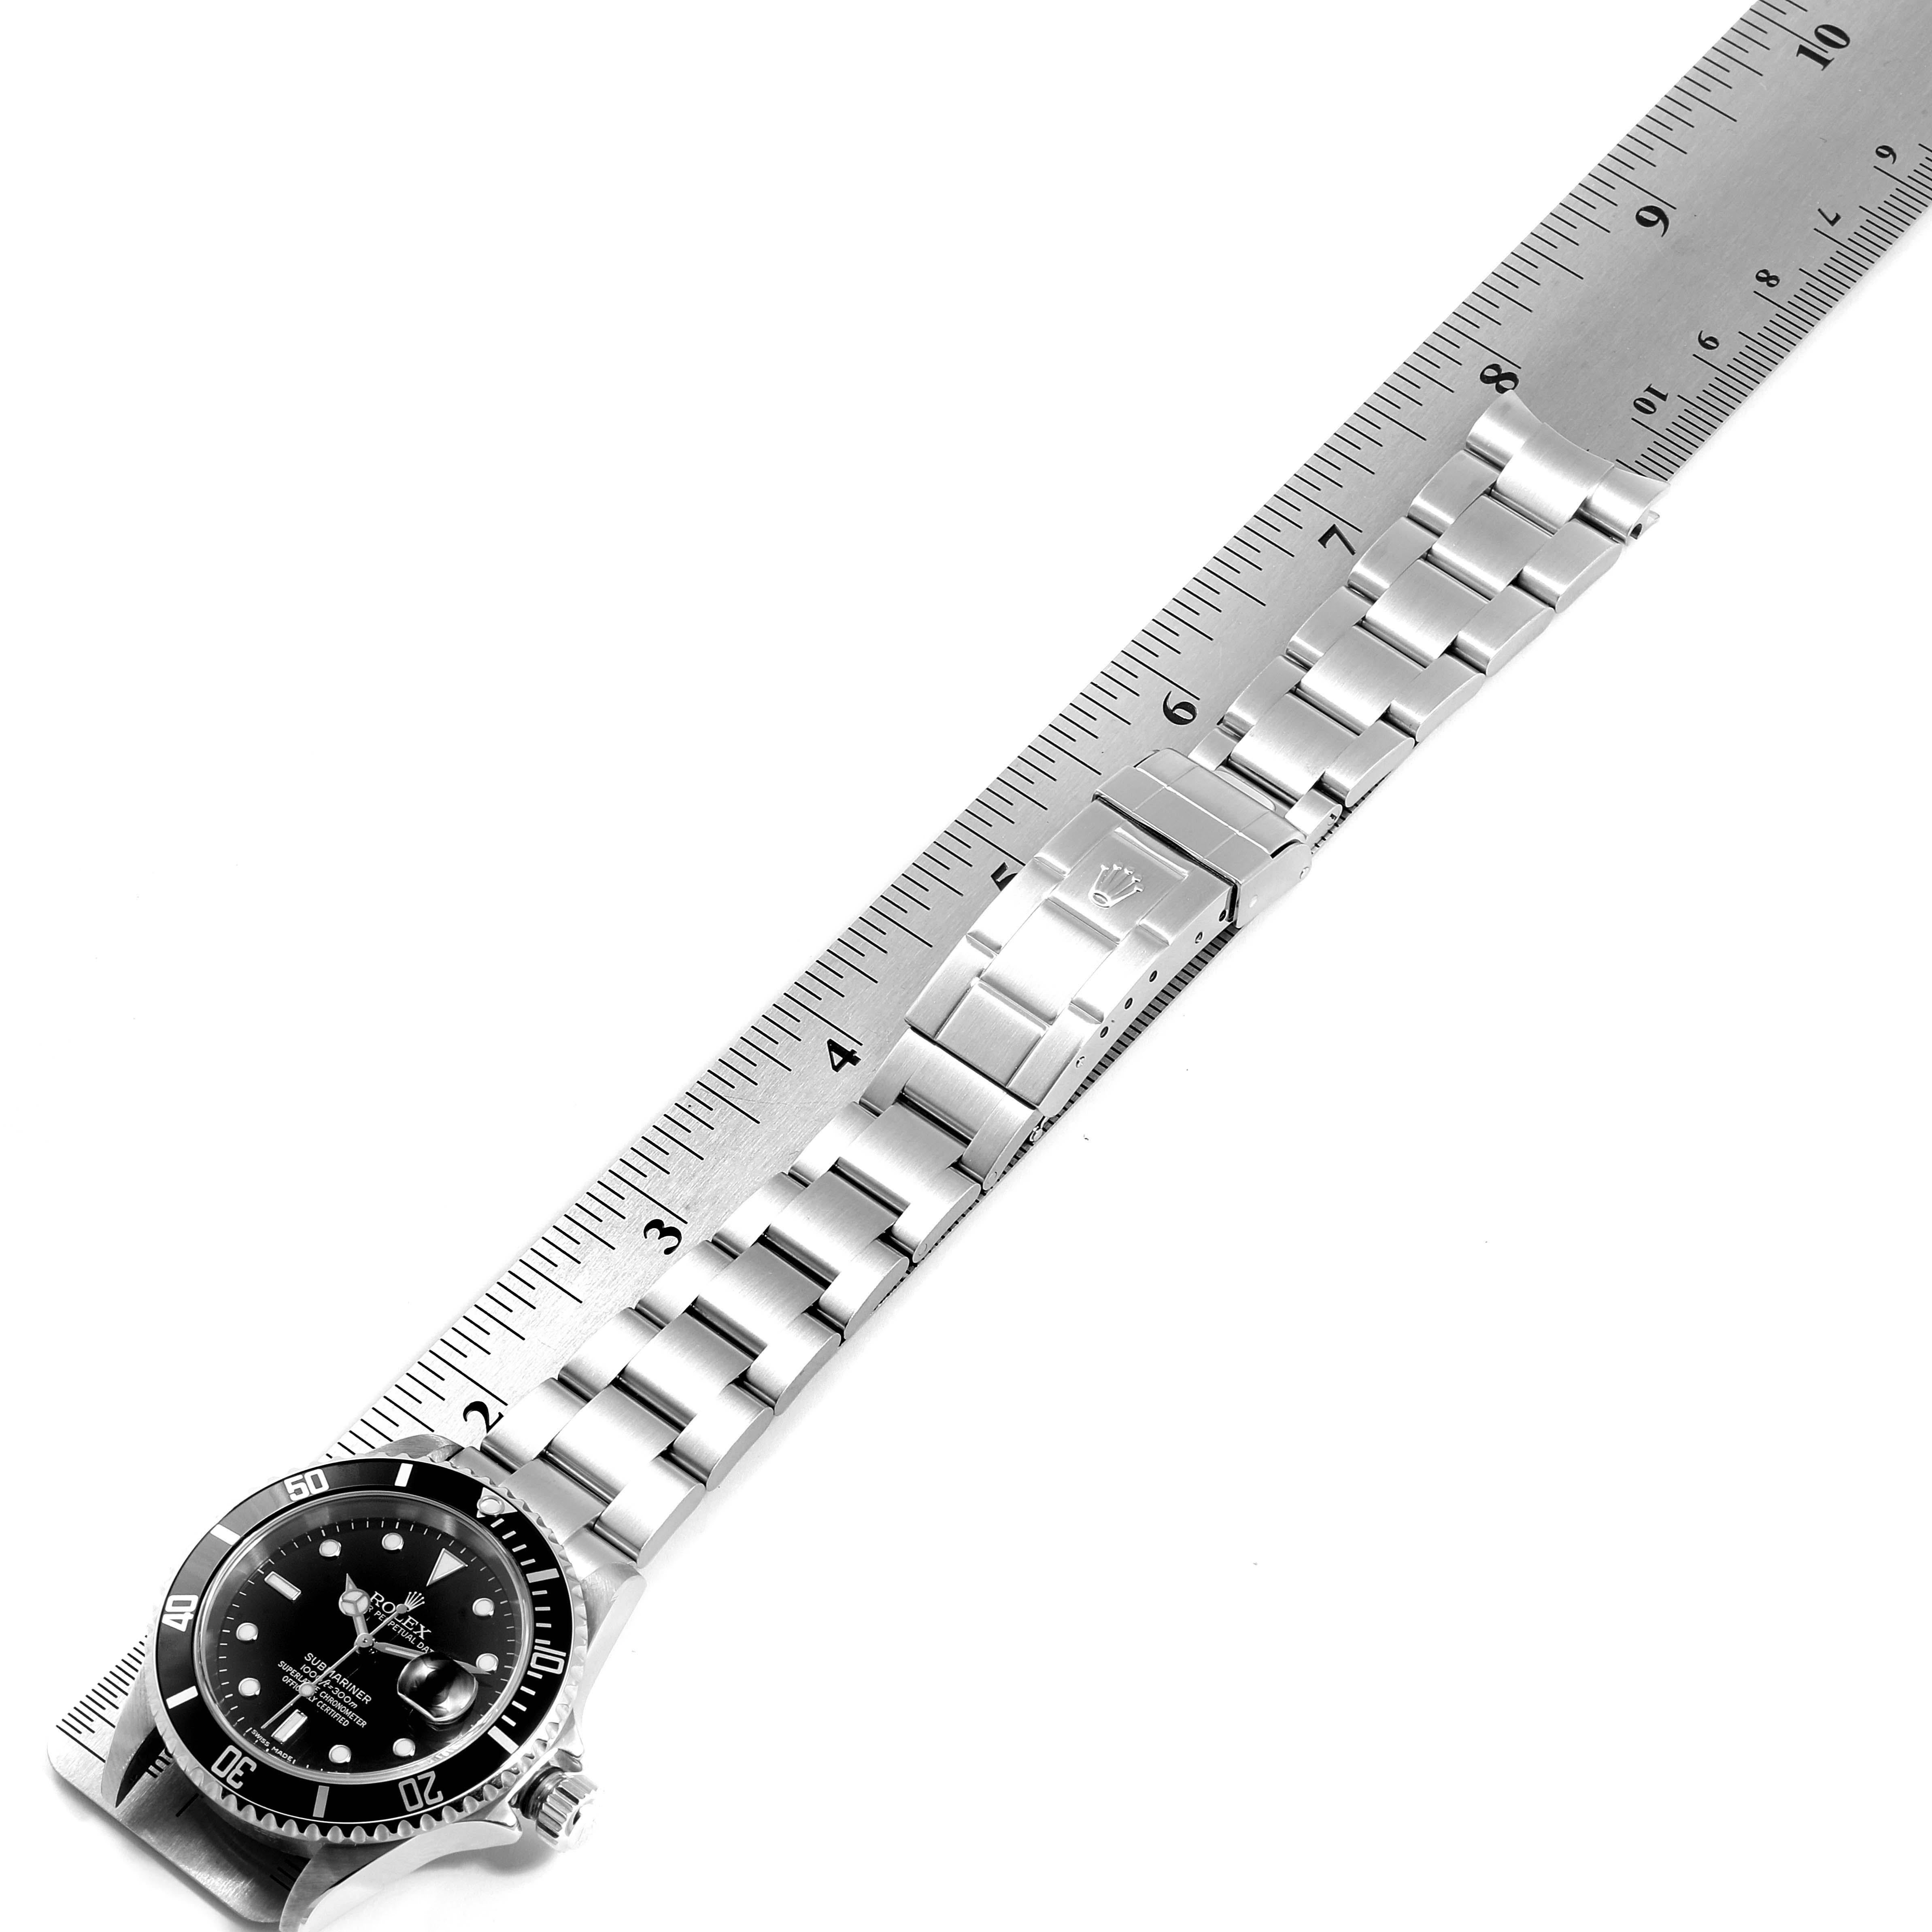 Rolex Submariner Date Stainless Steel Men's Watch 16610 For Sale 7